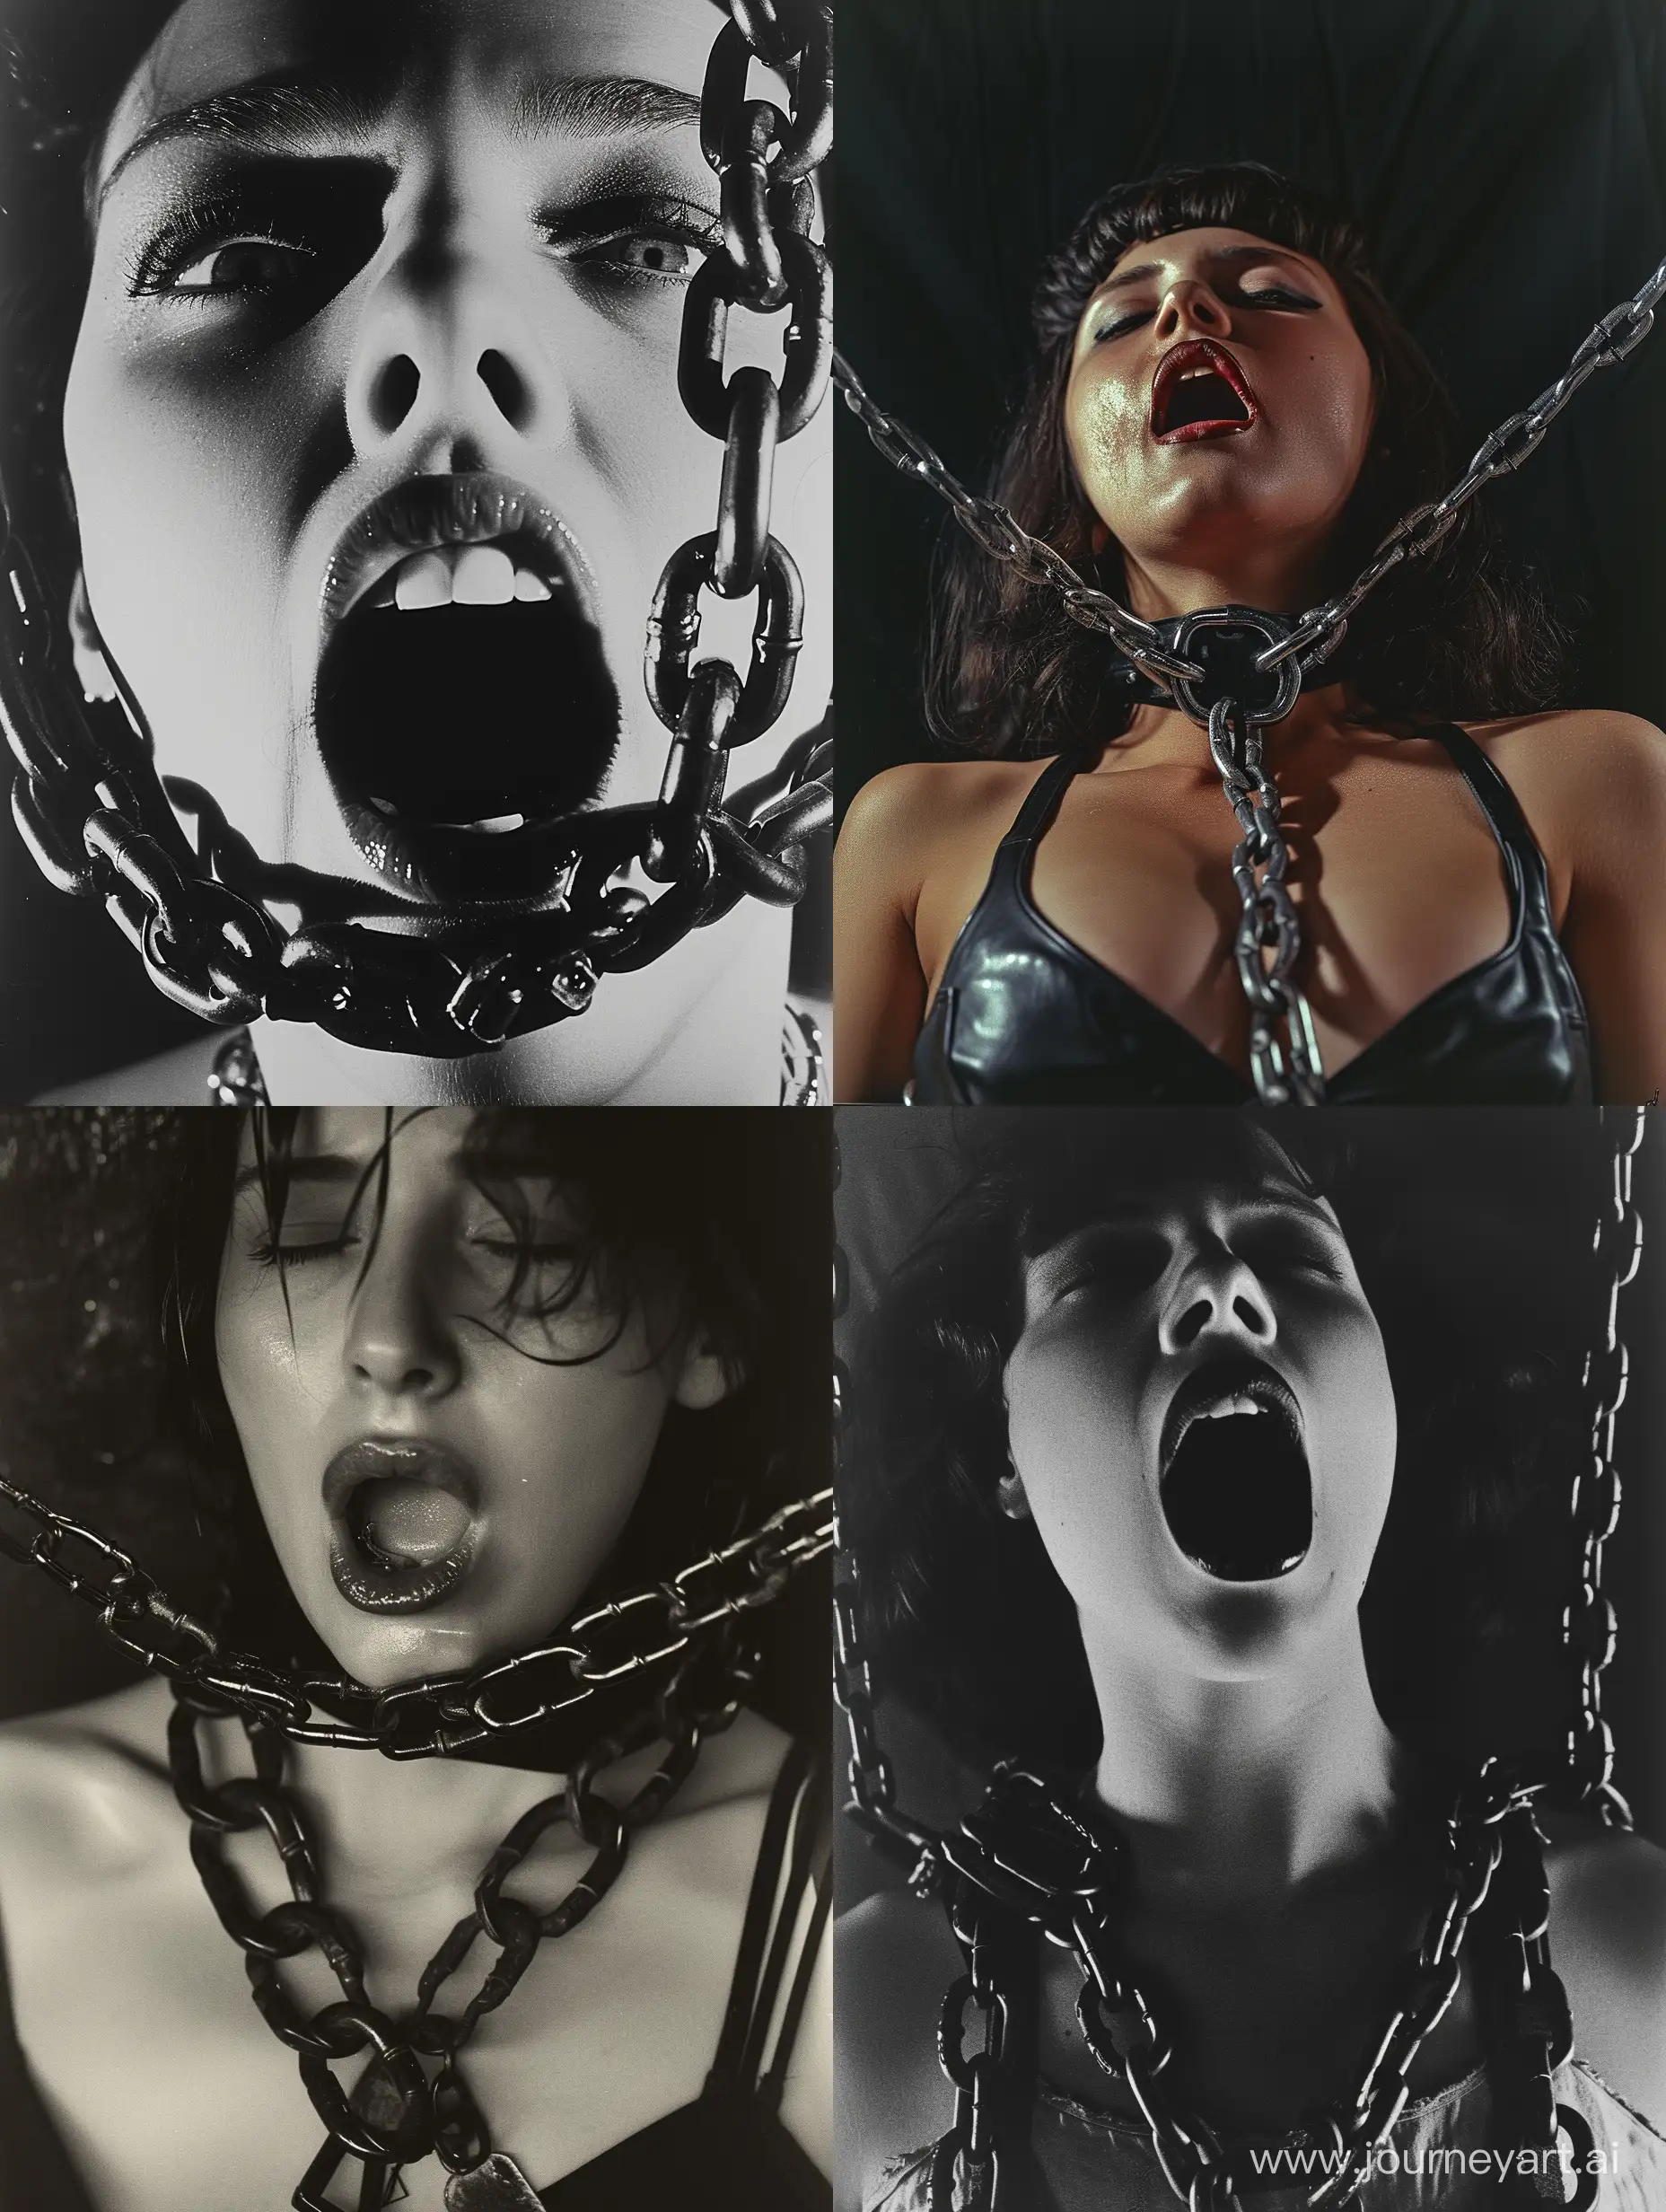 Saturated portrait of woman with mouth pri3d open using chains, chain, harness, unhinged, photo taken on provia